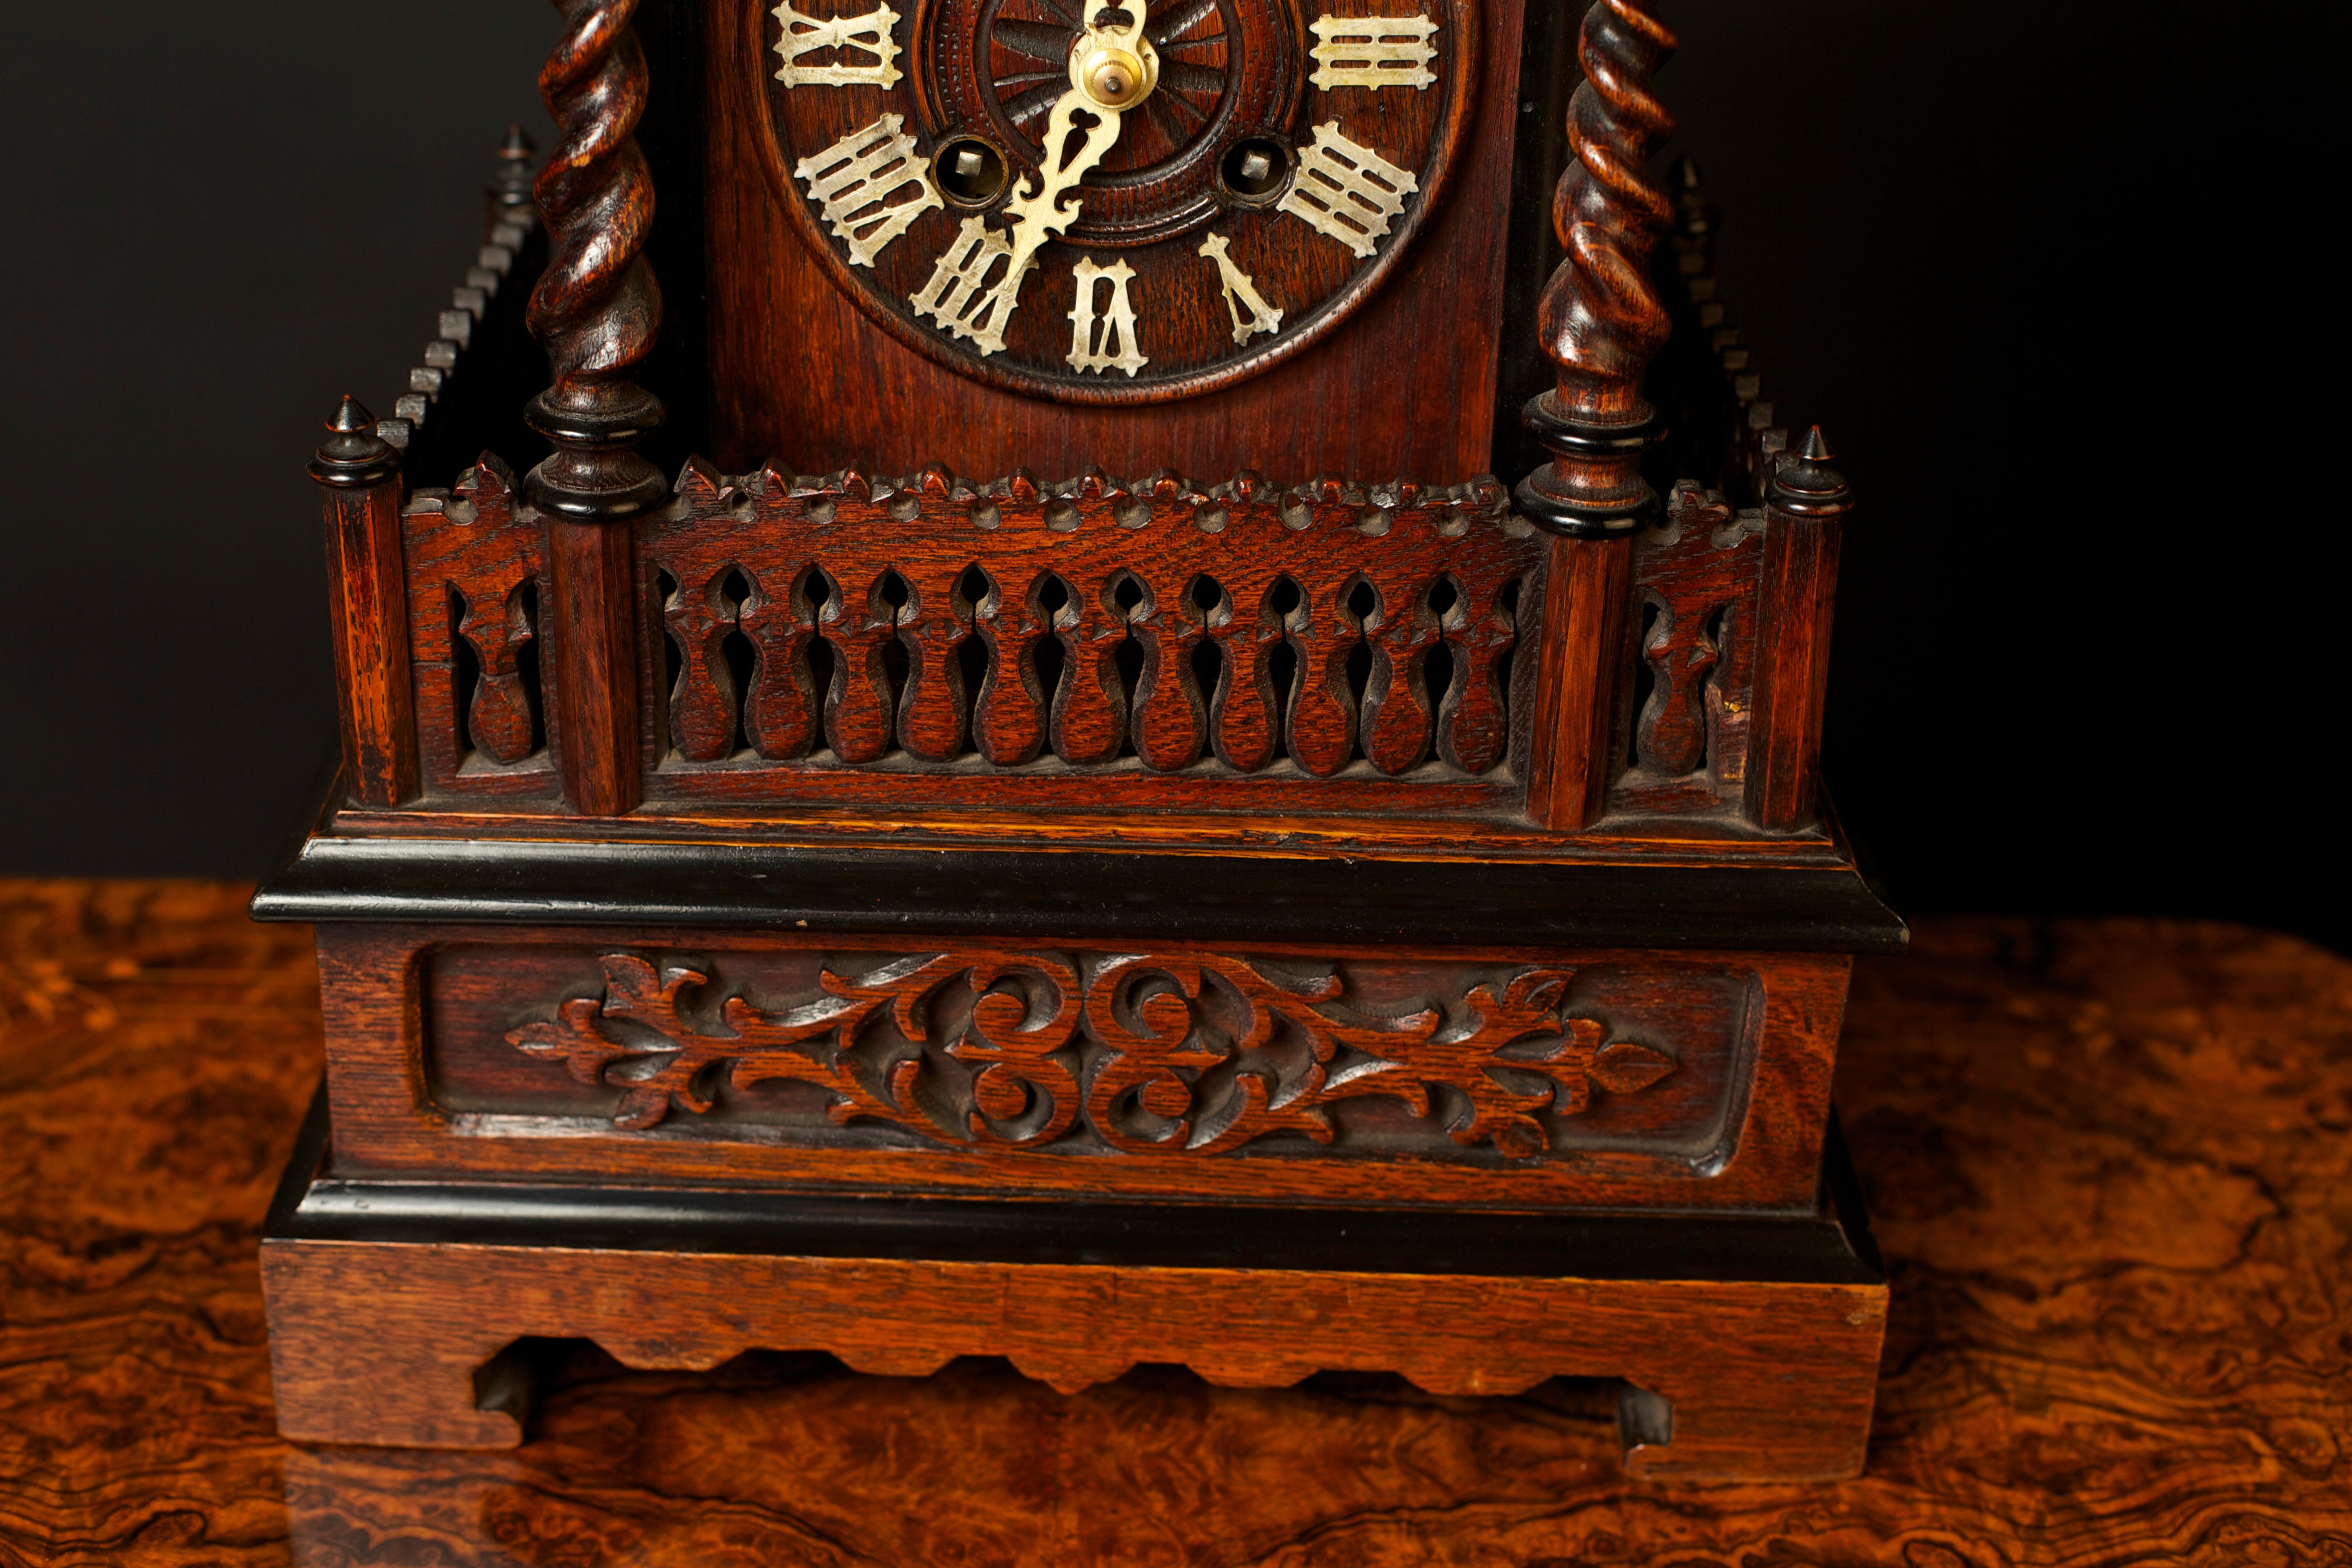 Victorian Cuckoo mantel (fireplace) clock in a chalet style oak case with galleried front and barley twist support columns. Beautifully carved decoration and Roman numerals to the dial. 

Brass thirty hour movement with Cuckoo automation striking